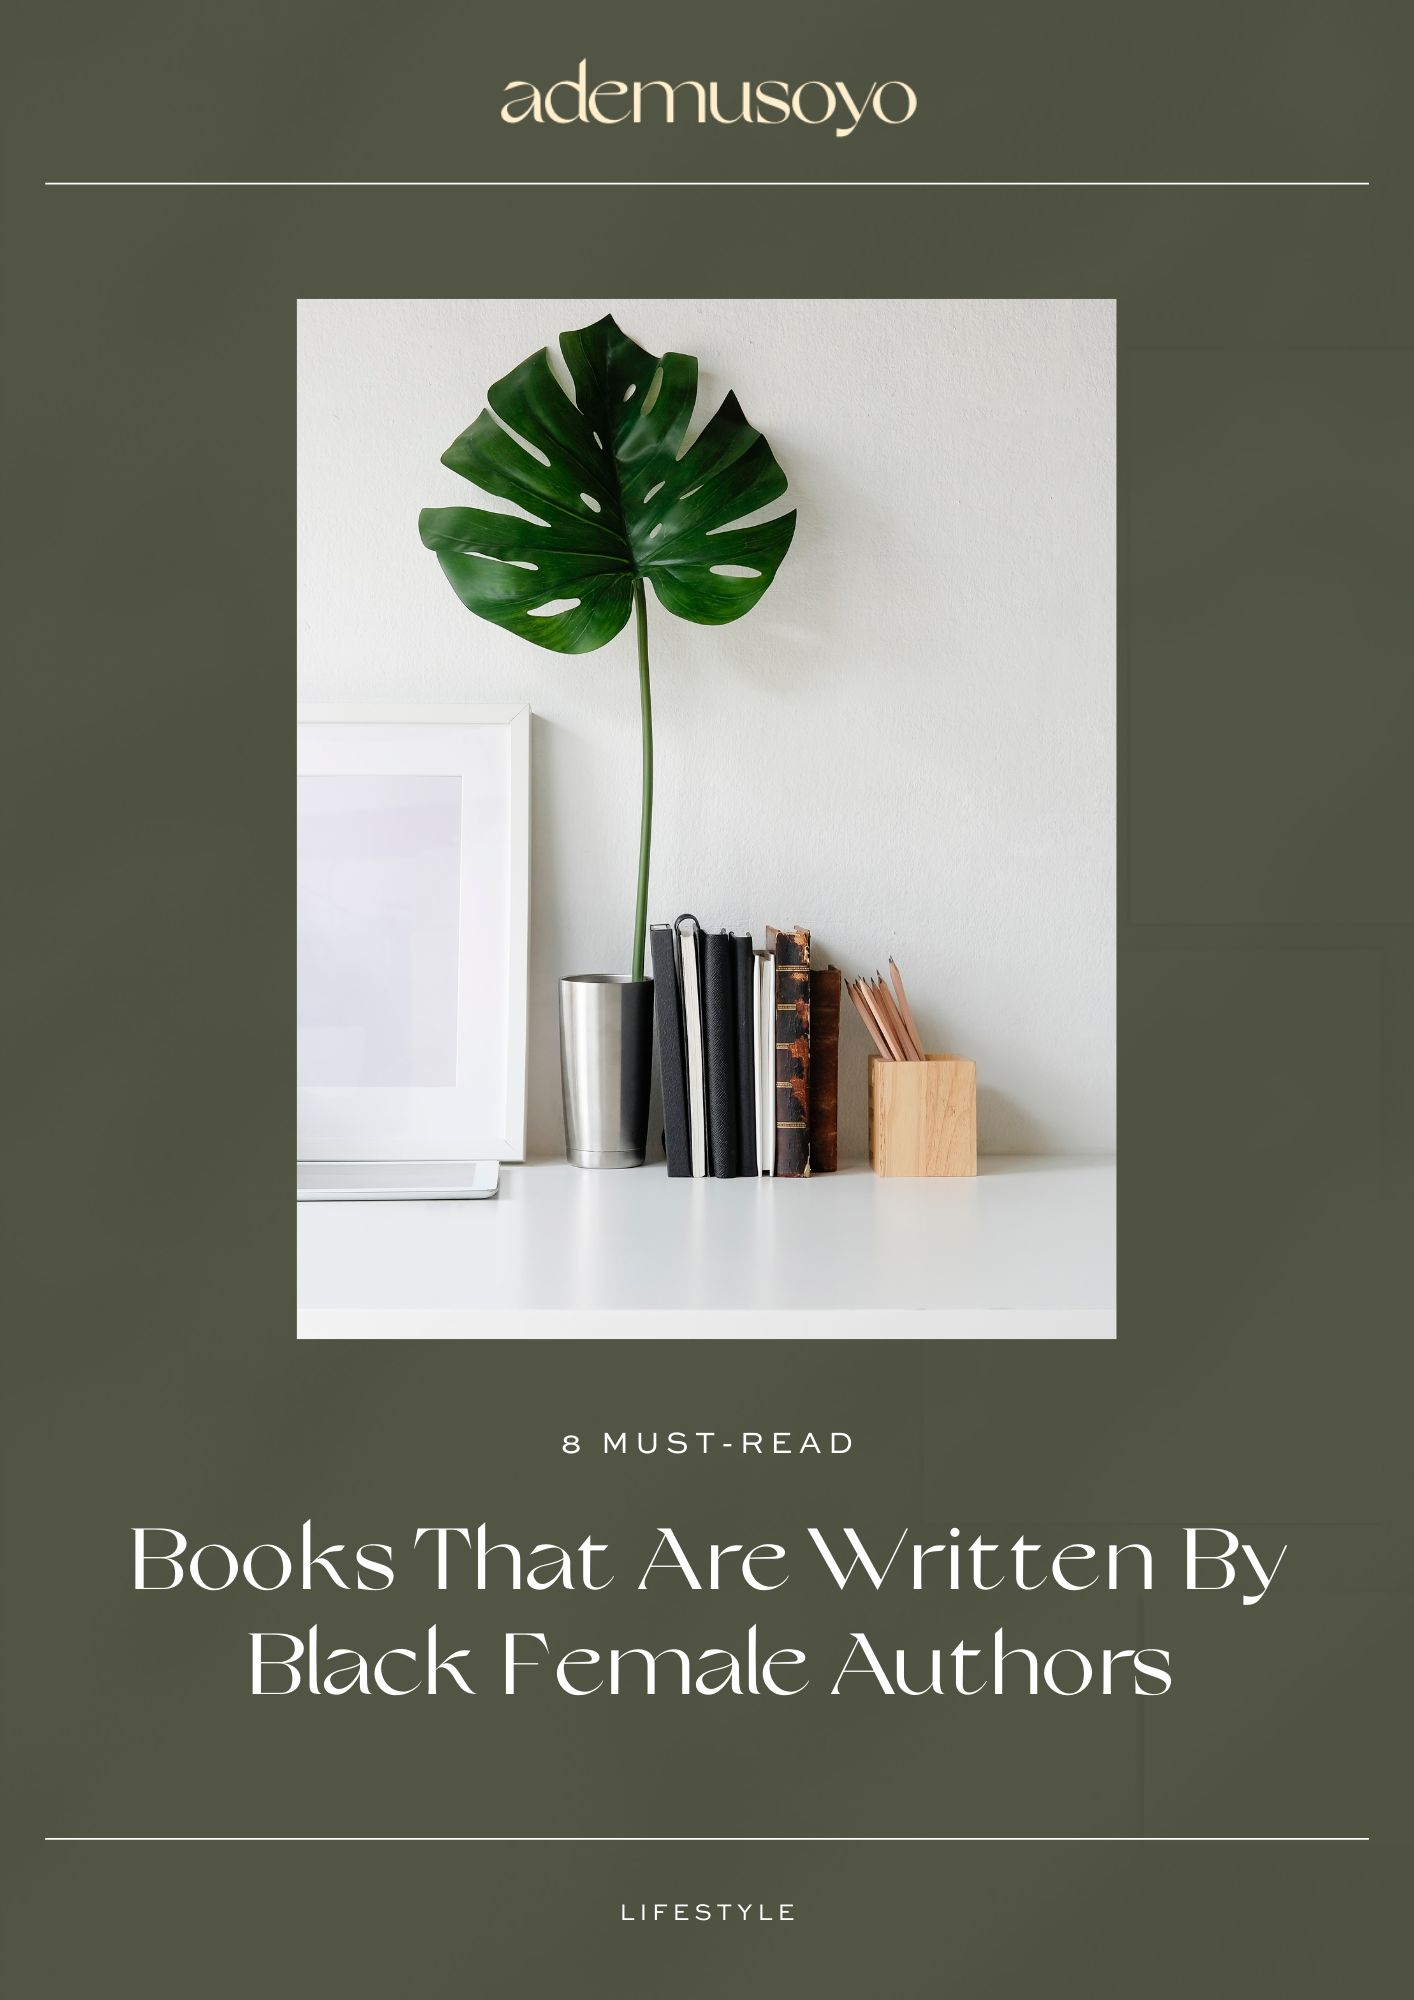 a blog cover image for a blog post about 8 must read books that are written by black female authors that shows a monstera leaf plant beside some books on a white table.